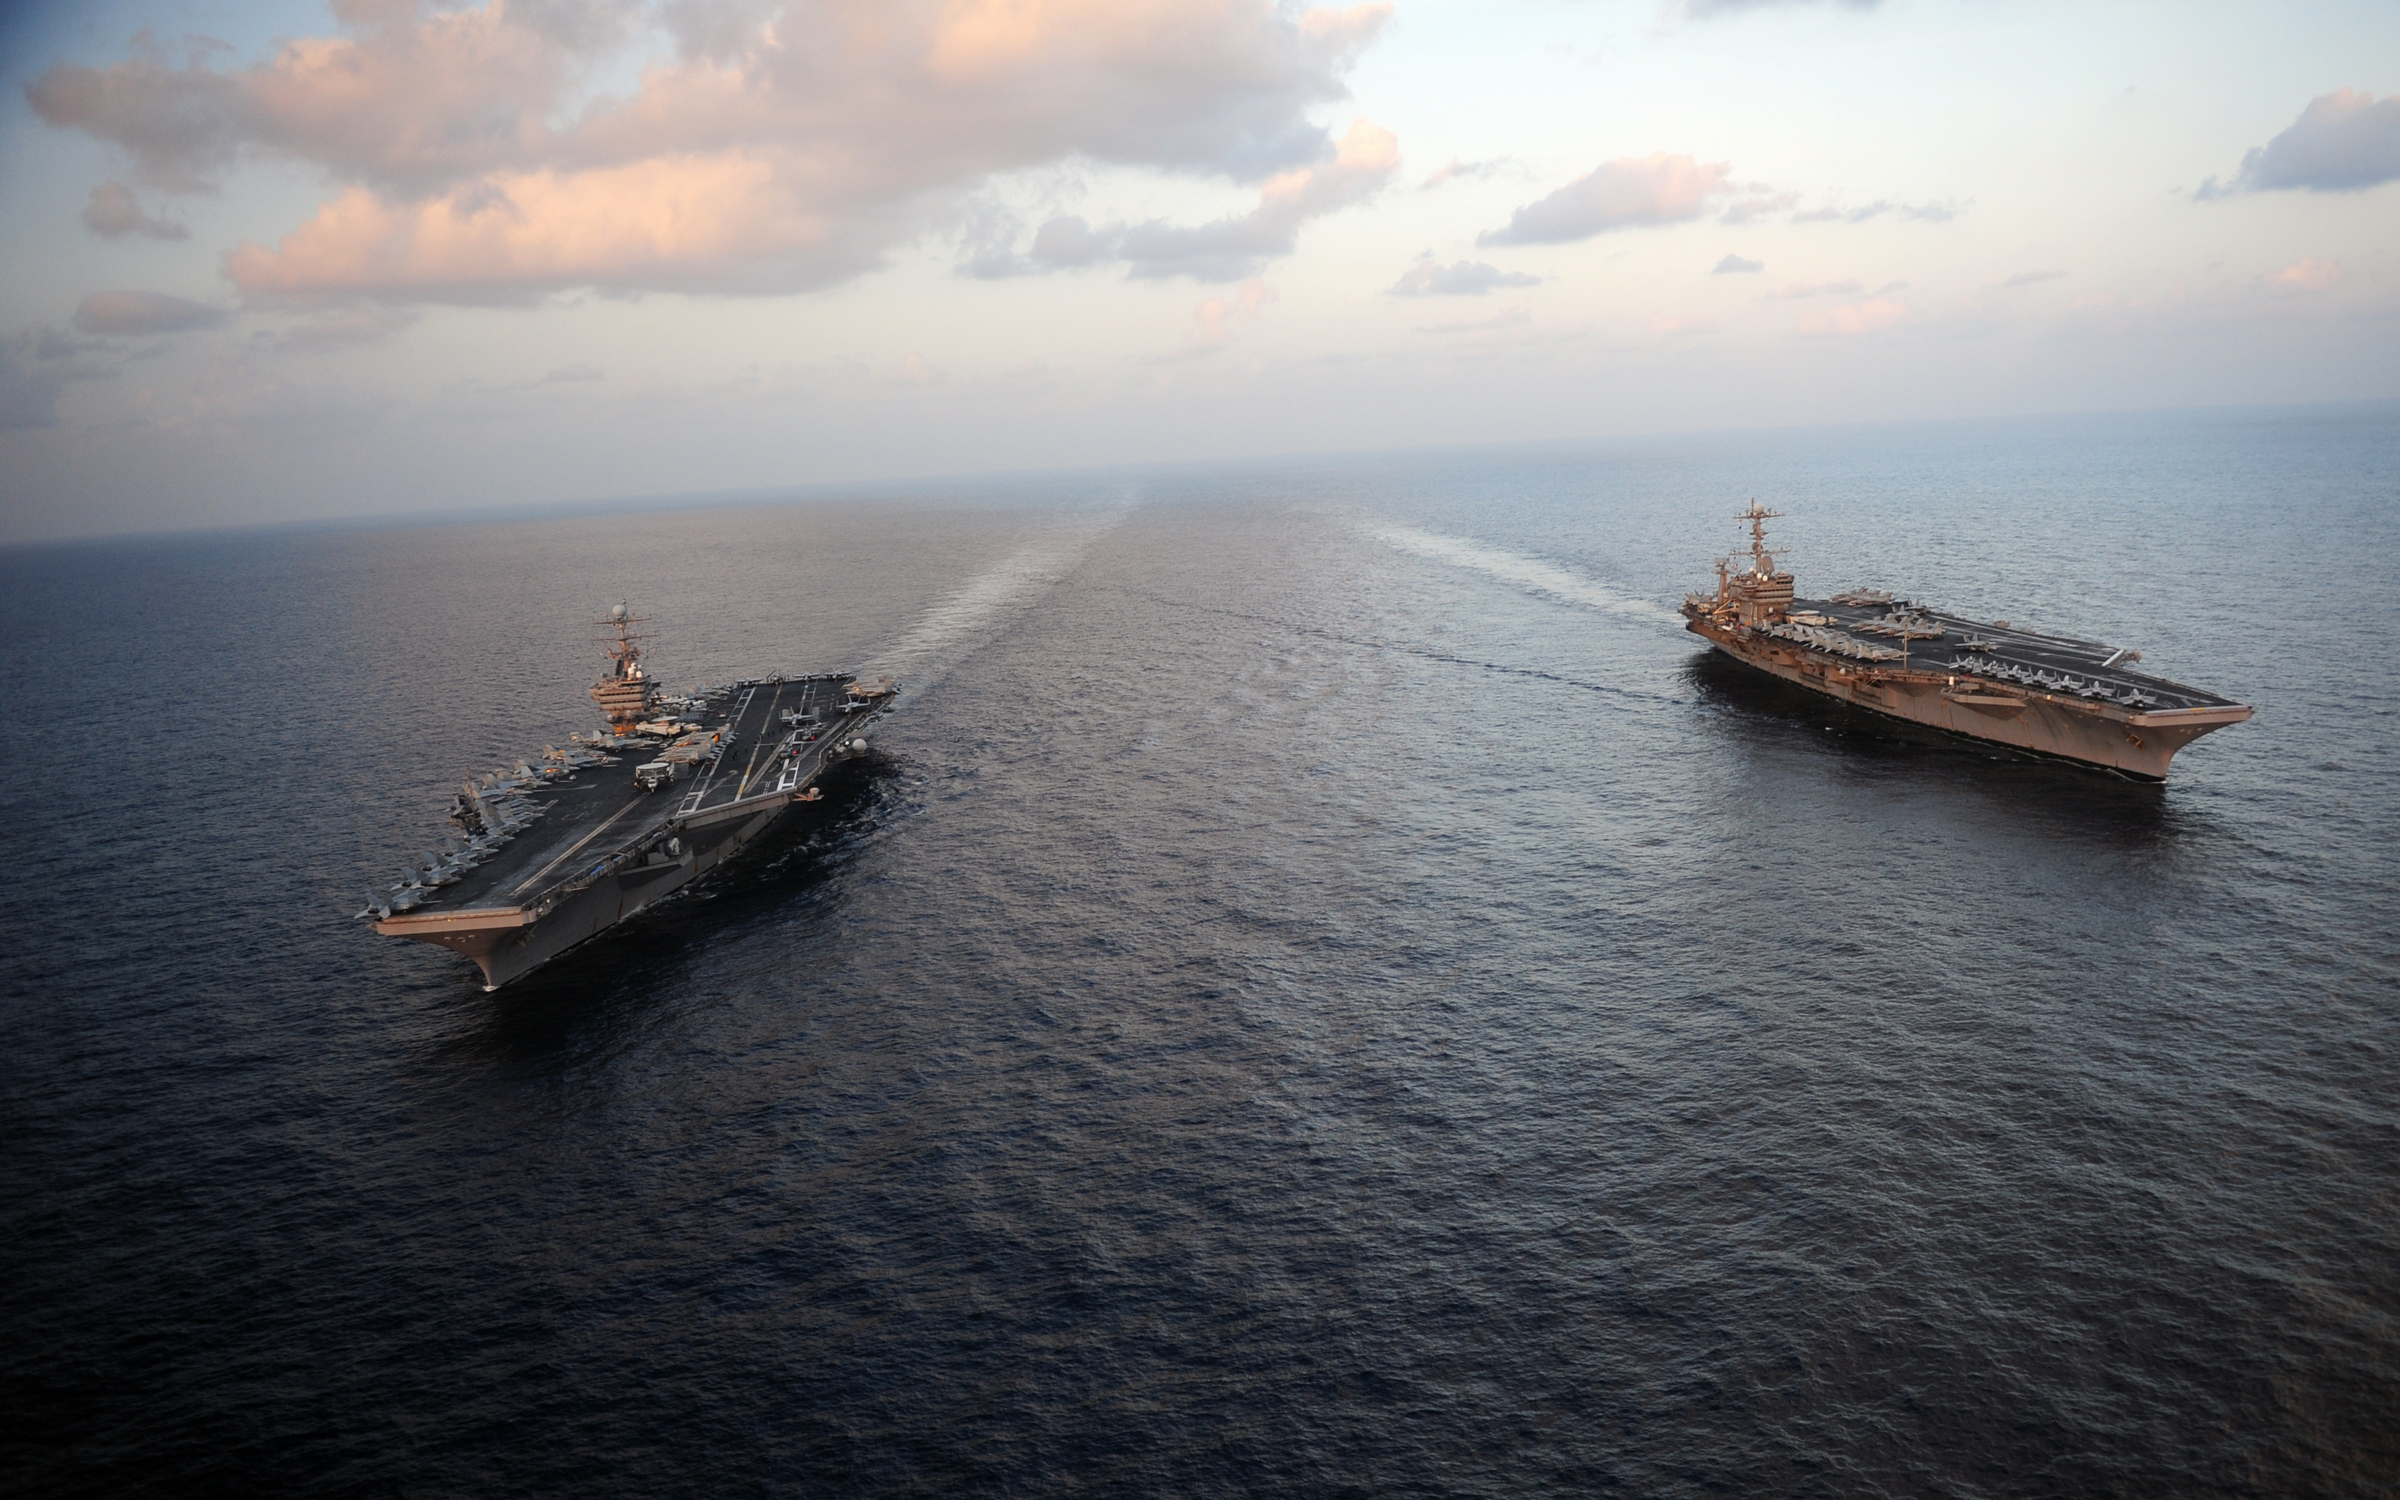 120119-N-YL945-045 - USS Abraham Lincoln (CVN 72) and USS John C. Stennis (CVN 74) join for a turnover of responsibility in the Arabian Sea